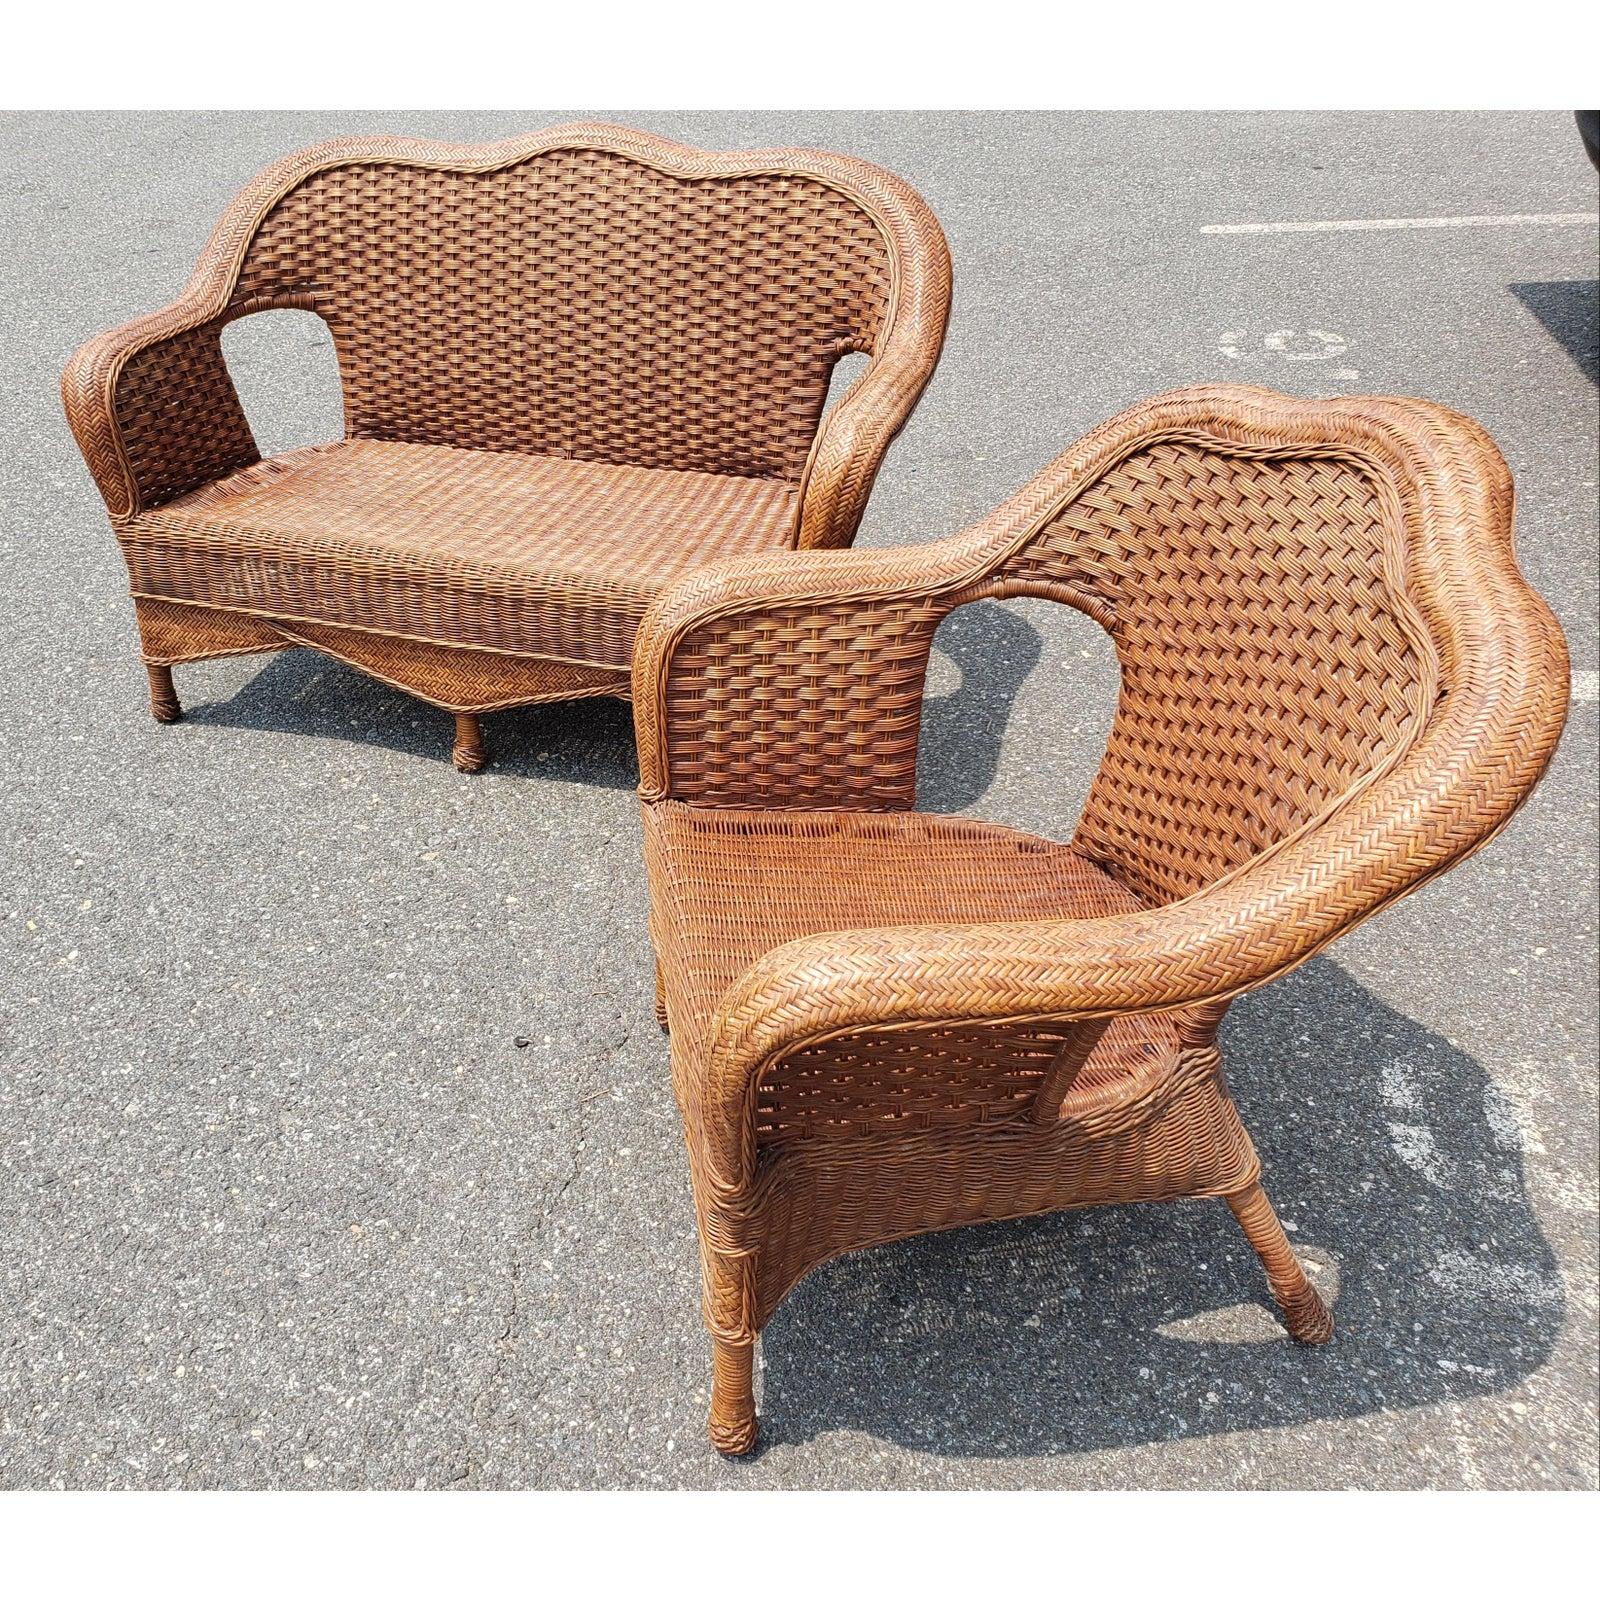 Hand-Crafted 1960s Vintage Wicker Rattan Loveseat and Chair Set in Floral Upholstery, 2 Pieces